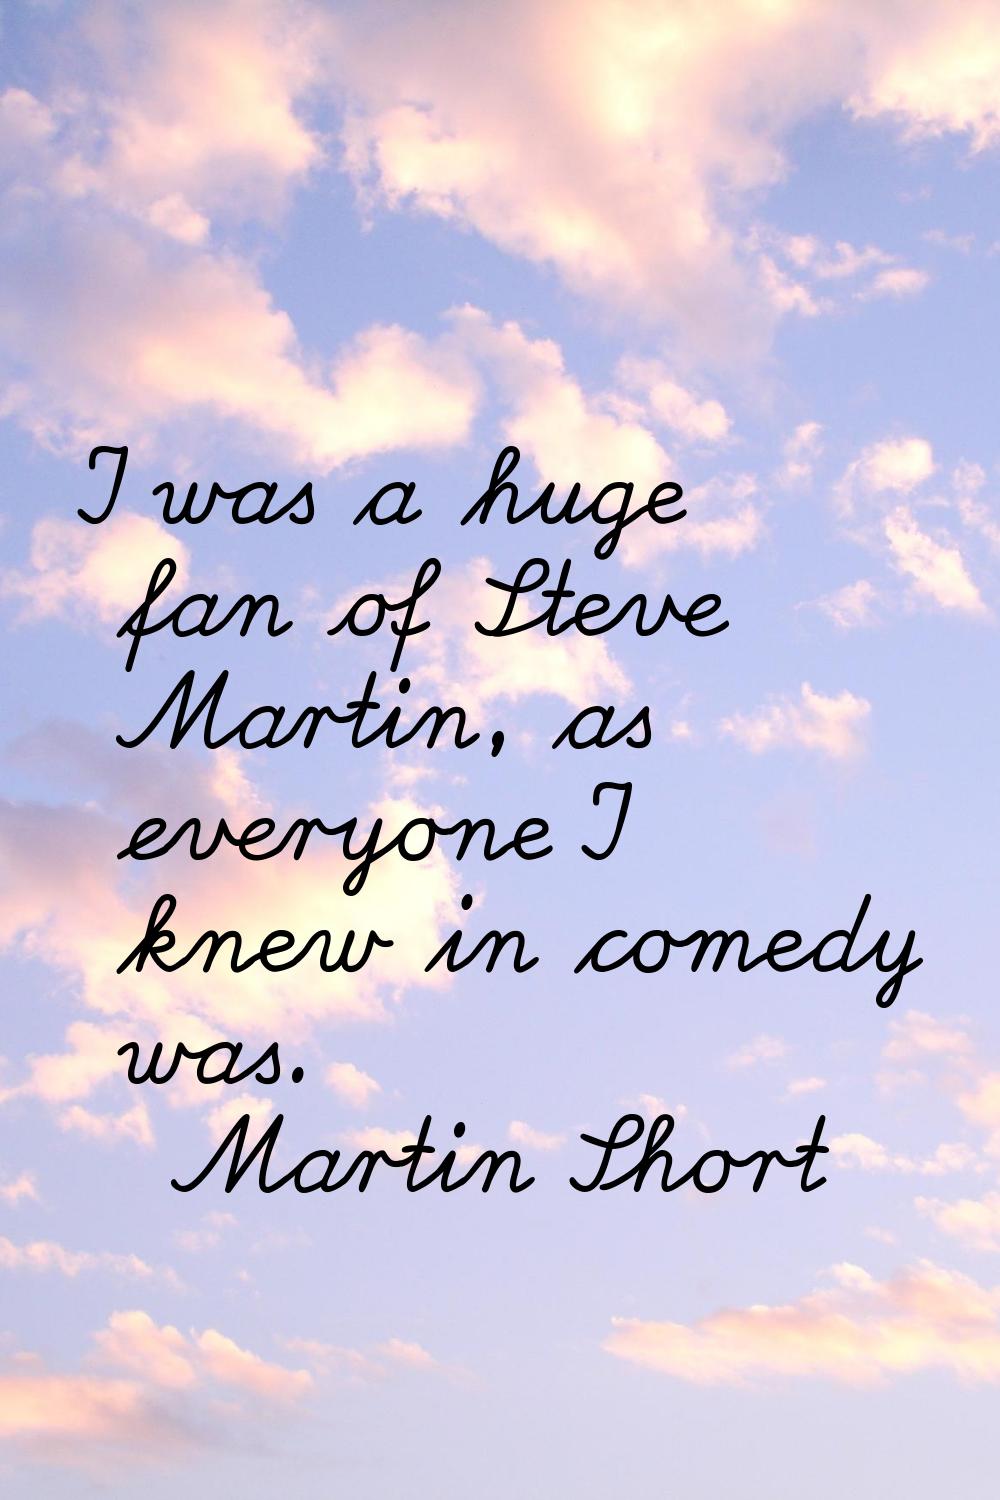 I was a huge fan of Steve Martin, as everyone I knew in comedy was.